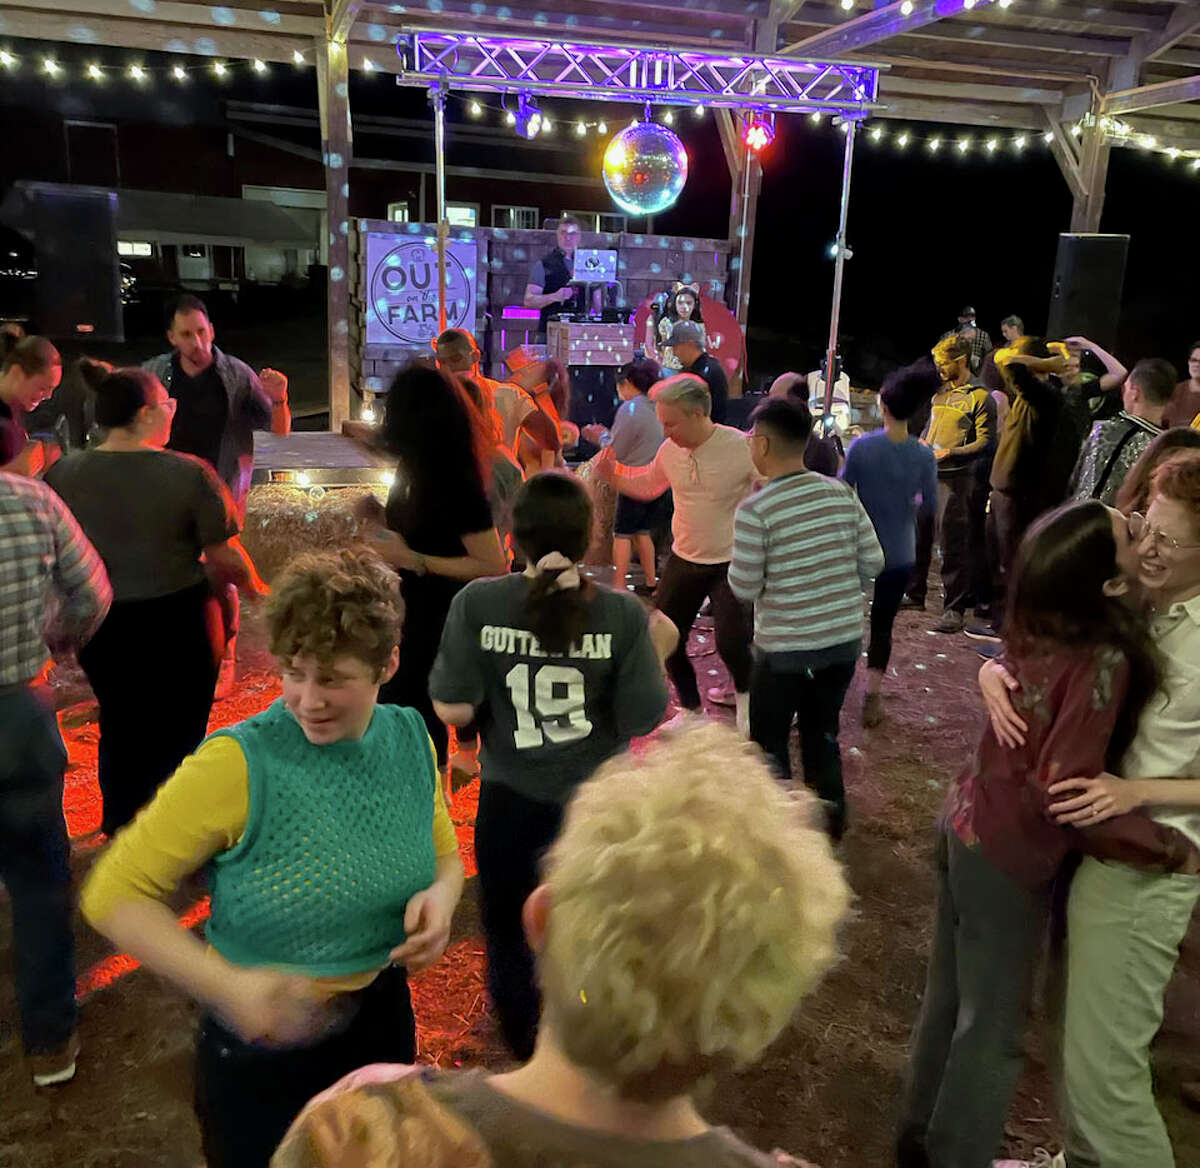 The dance floor at Big Gay Hudson Valley’s events is a reflection of the increasingly diverse queer community in the Hudson Valley.